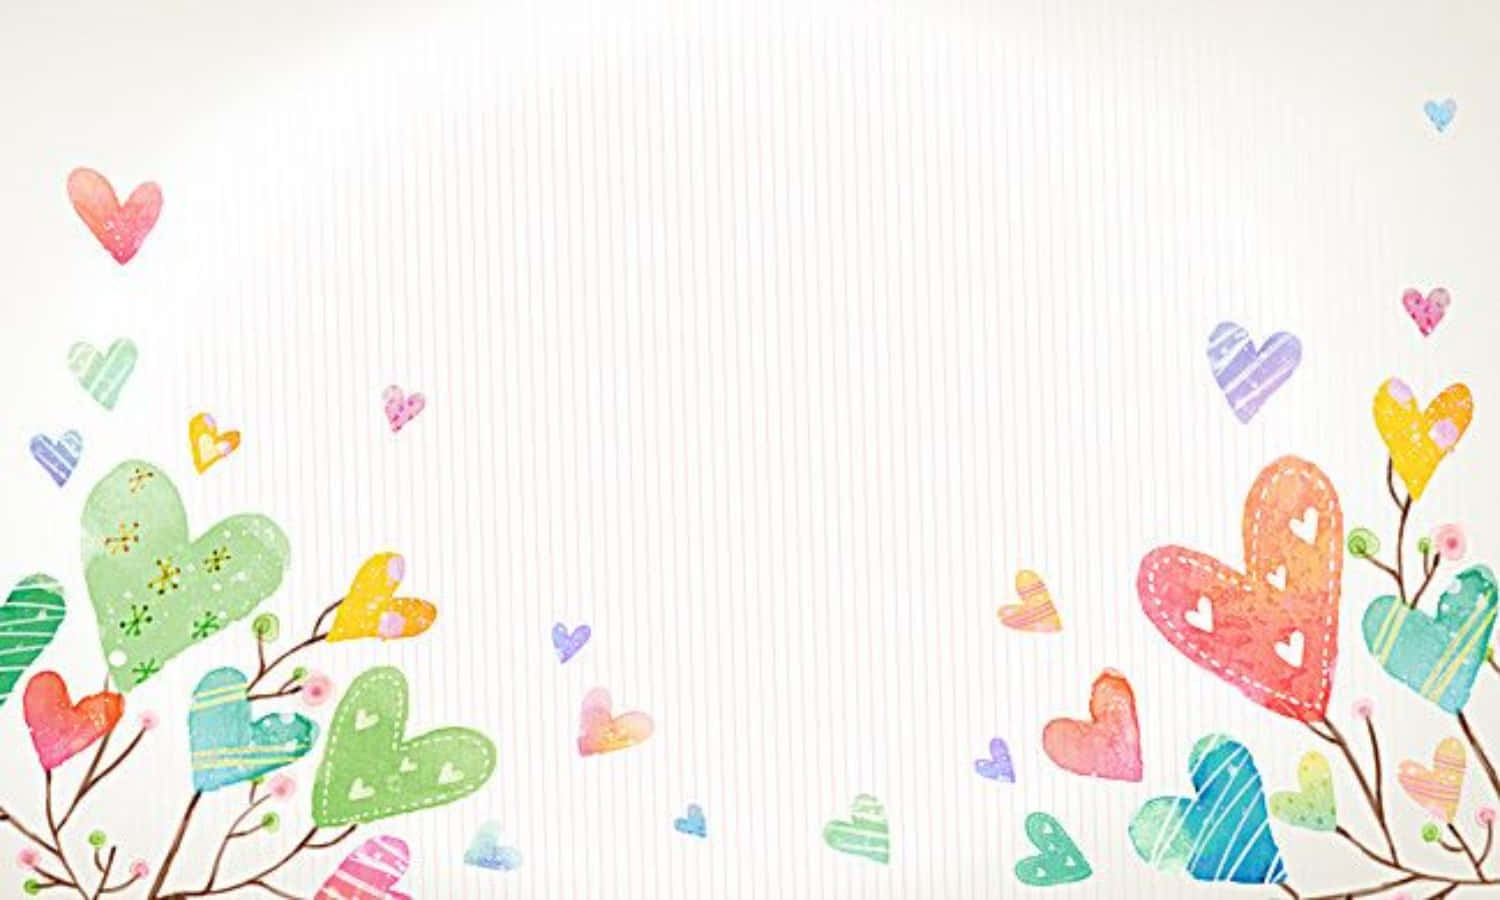 A vibrant illustration of a smiling cartoon heart with outstretched arms Wallpaper